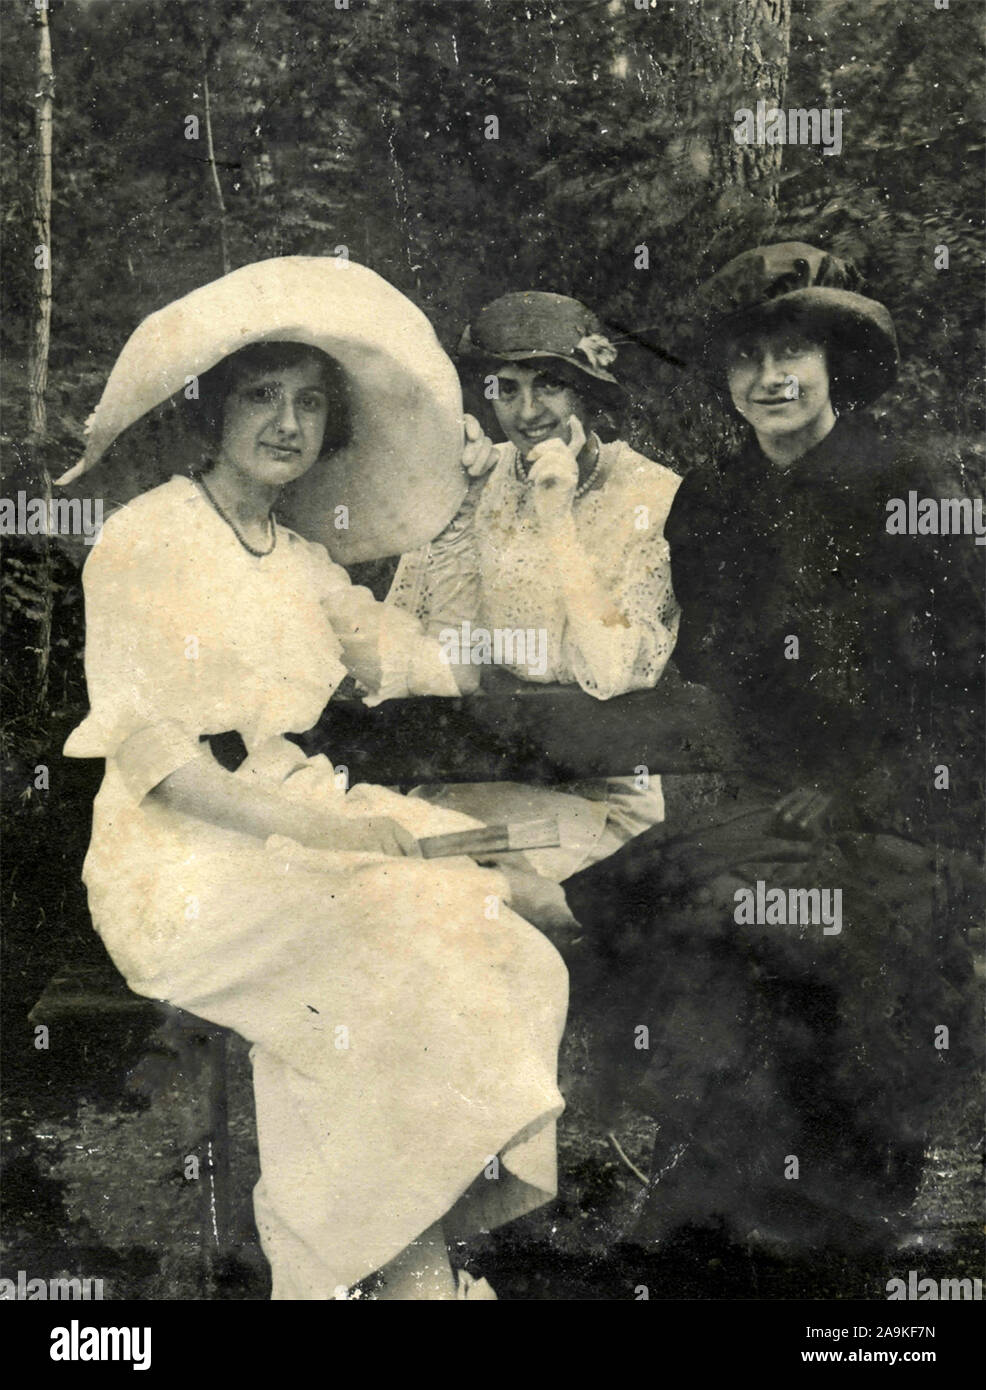 Three women with large hats and dresses of the beginning of the XX century Stock Photo